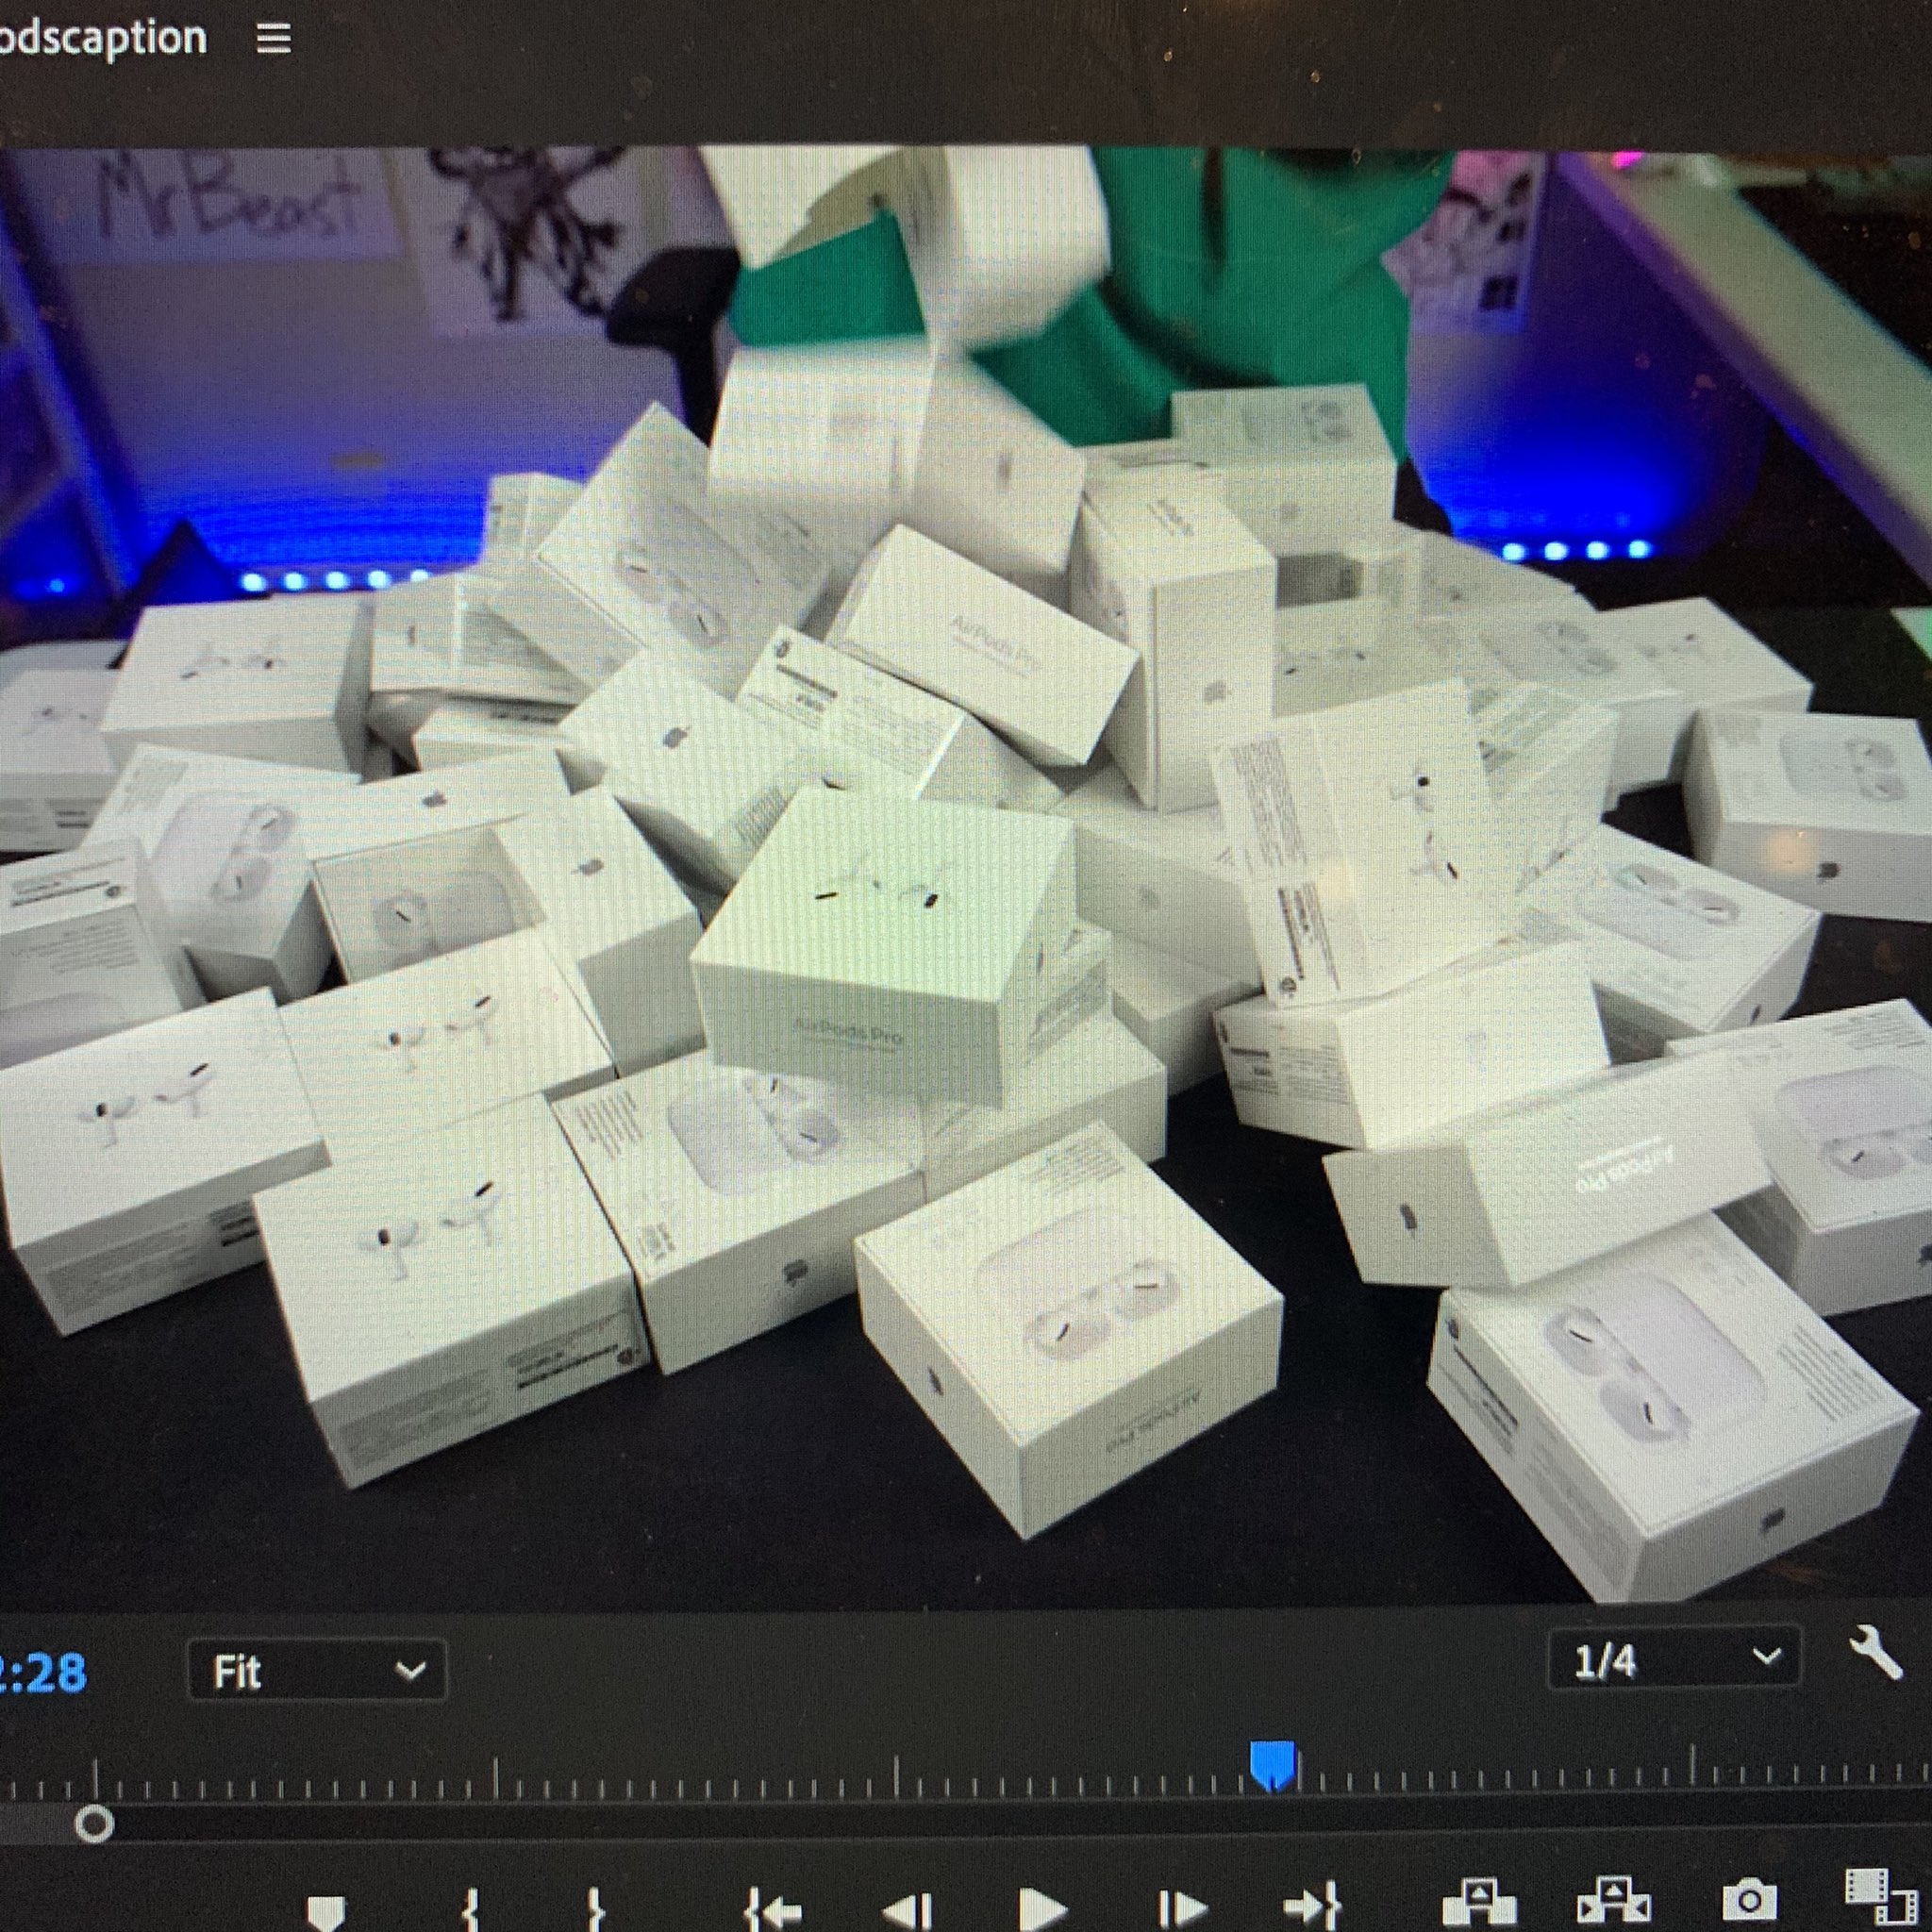 Forsømme Lagring ansvar ZHC on Twitter: "Tomorrow at 12:30 PM PST I am uploading a 100 custom  airpods pro video! First 3 comments will win custom airpods and the rest  will be given to you